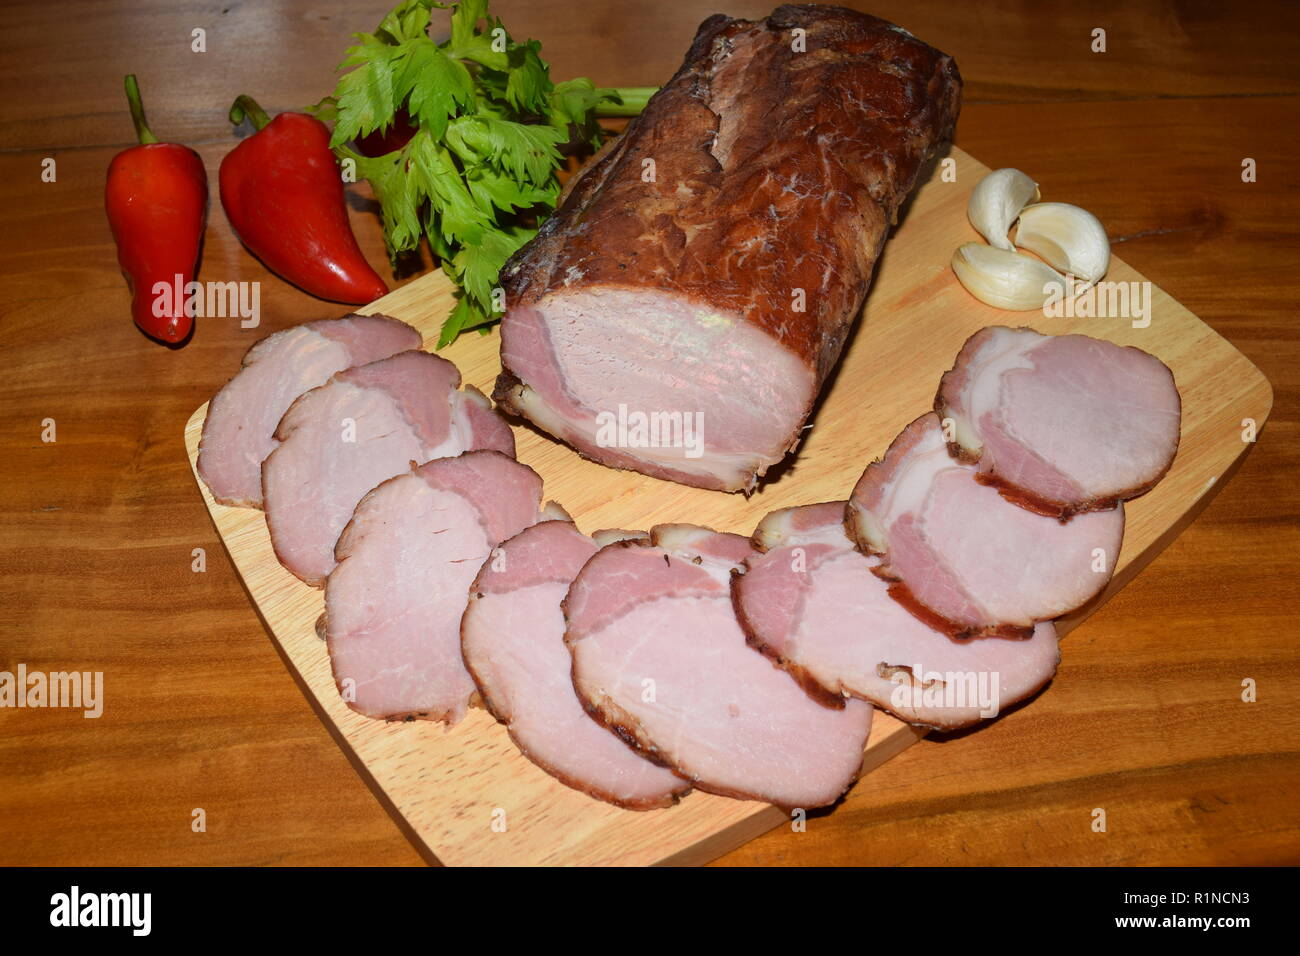 Kassler on wooden rustic plate. It is often served with sauerkraut and mashed potatoes. Fully Cooked cured and smoked pork loin chops on a wooden tray. Stock Photo